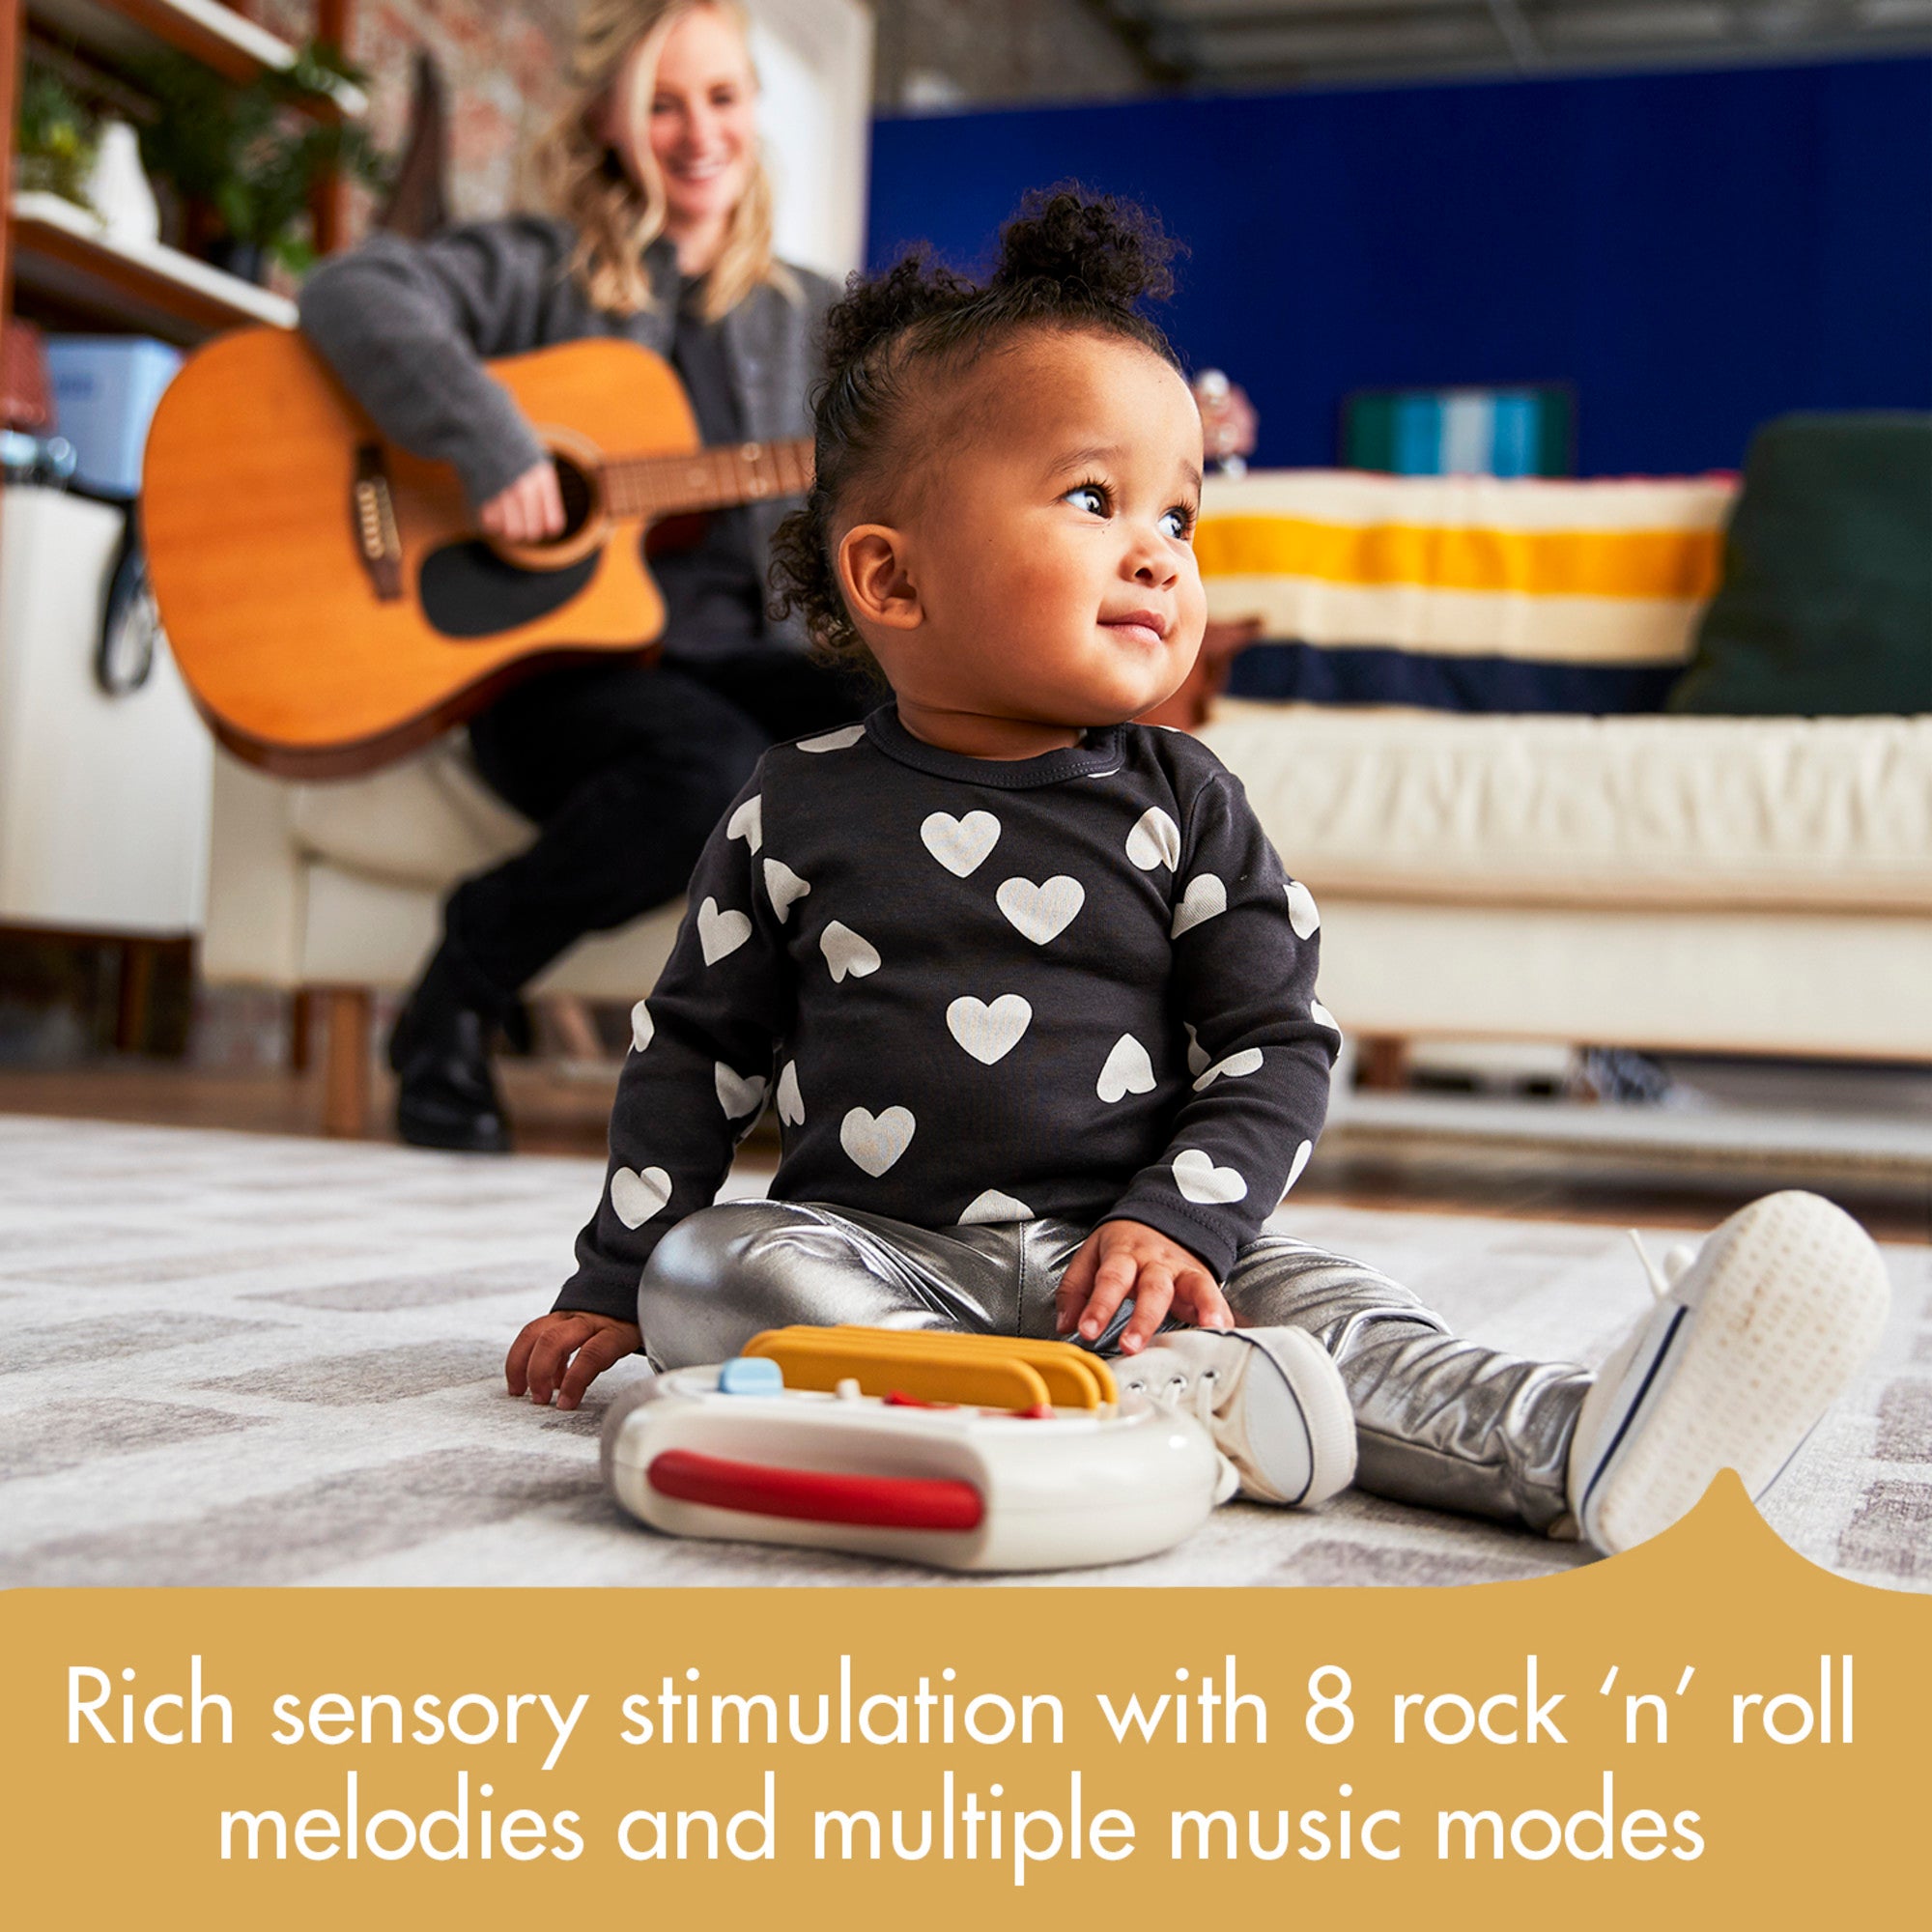 Tiny Rockers Guitar - Rick sensory stimulation with 8 rock 'n' roll melodies and multiple music modes